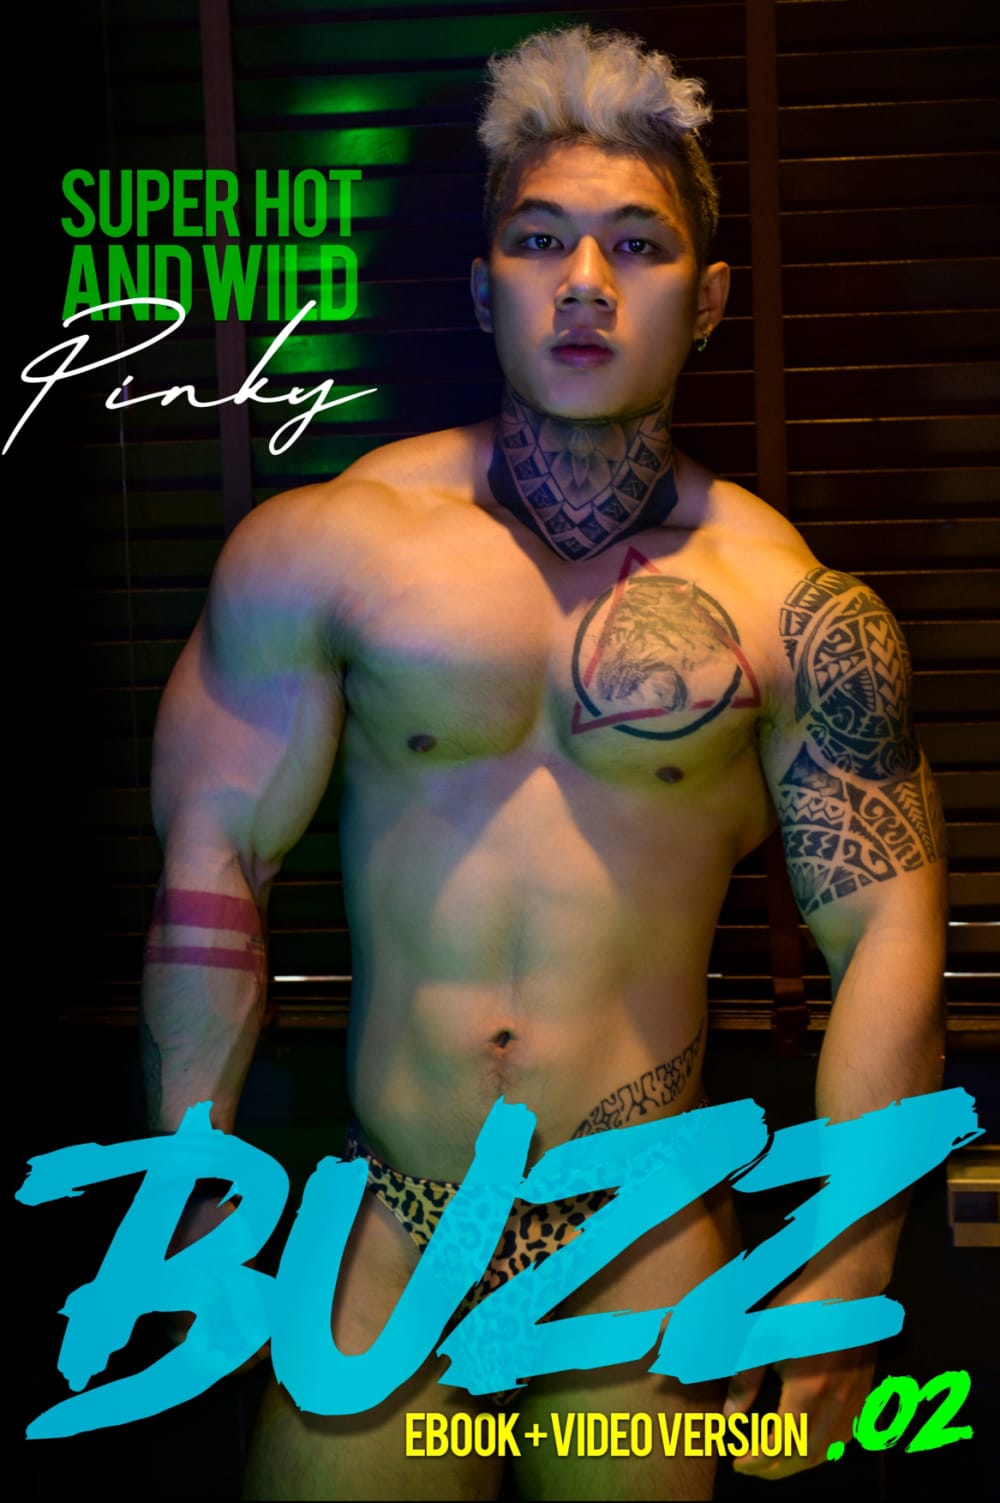 BUZZ ISSUE NO.02 PINKY ‖ 19+【PHOTO+VIDEO】